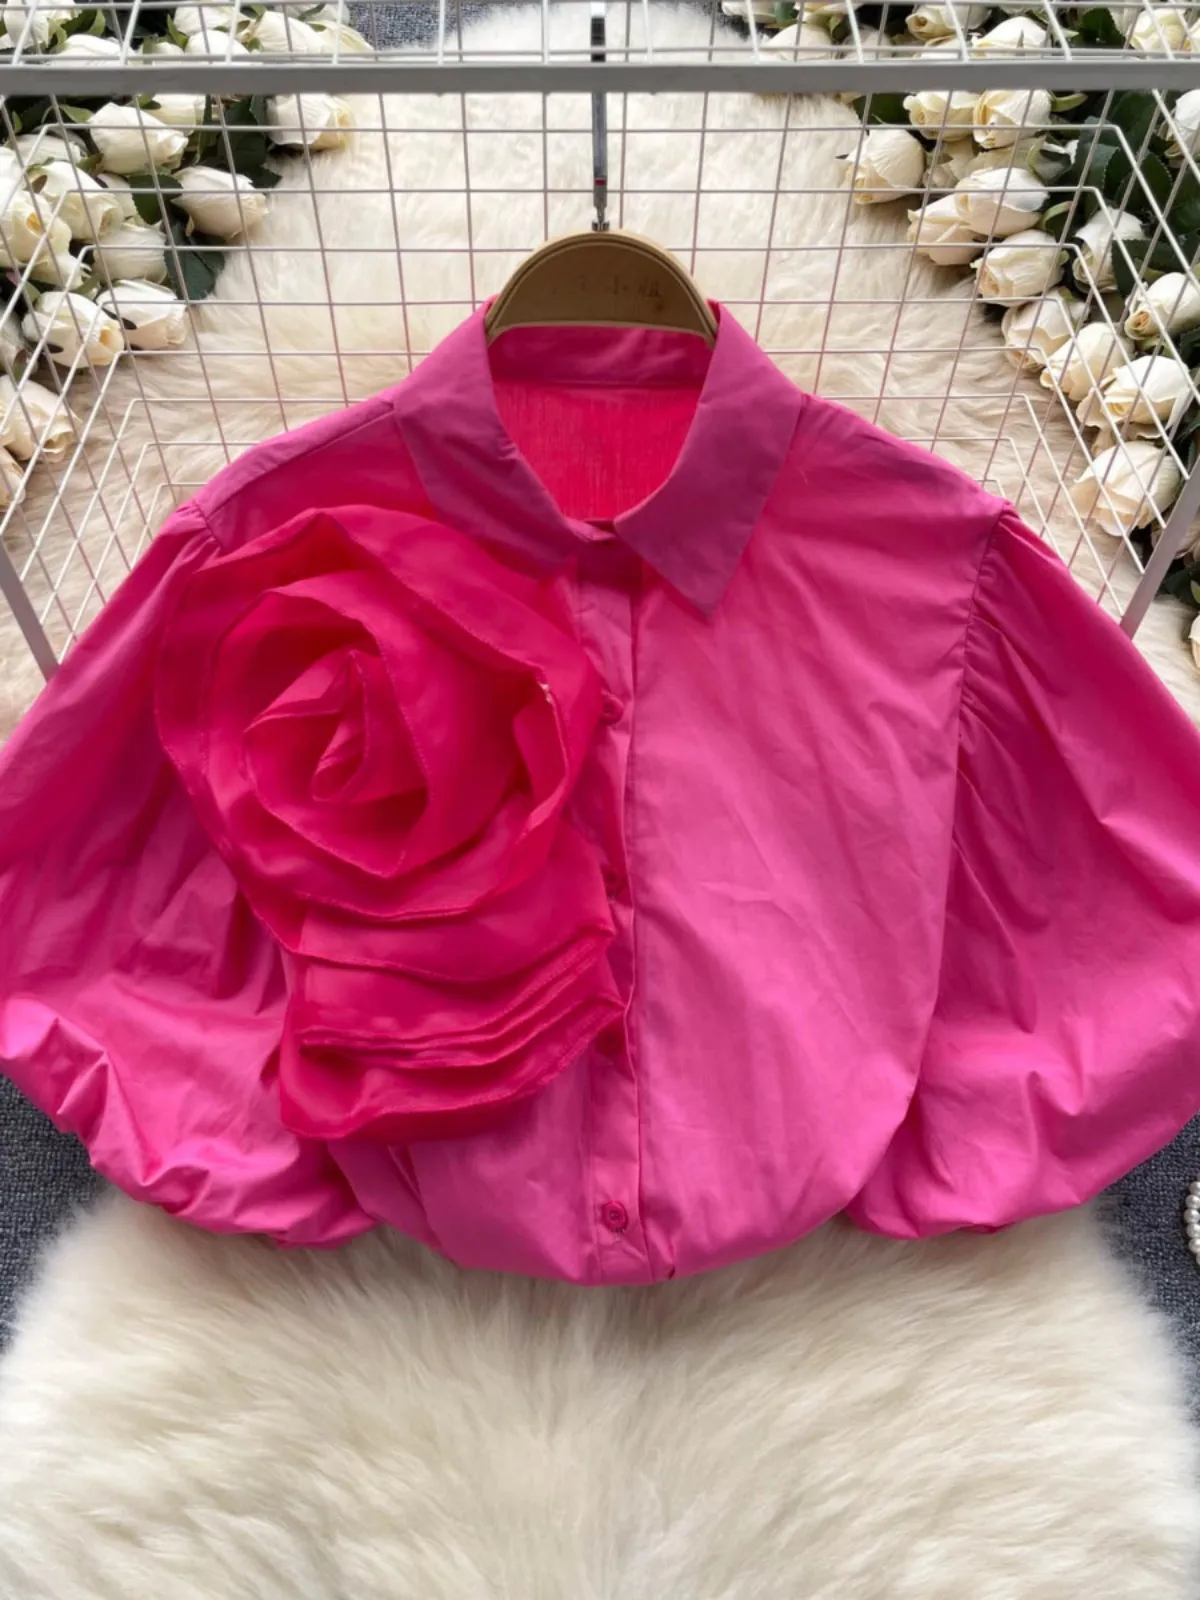 High end exquisite women's shirt, three-dimensional large flower bubble sleeve, versatile and unique shirt, niche light luxury French top